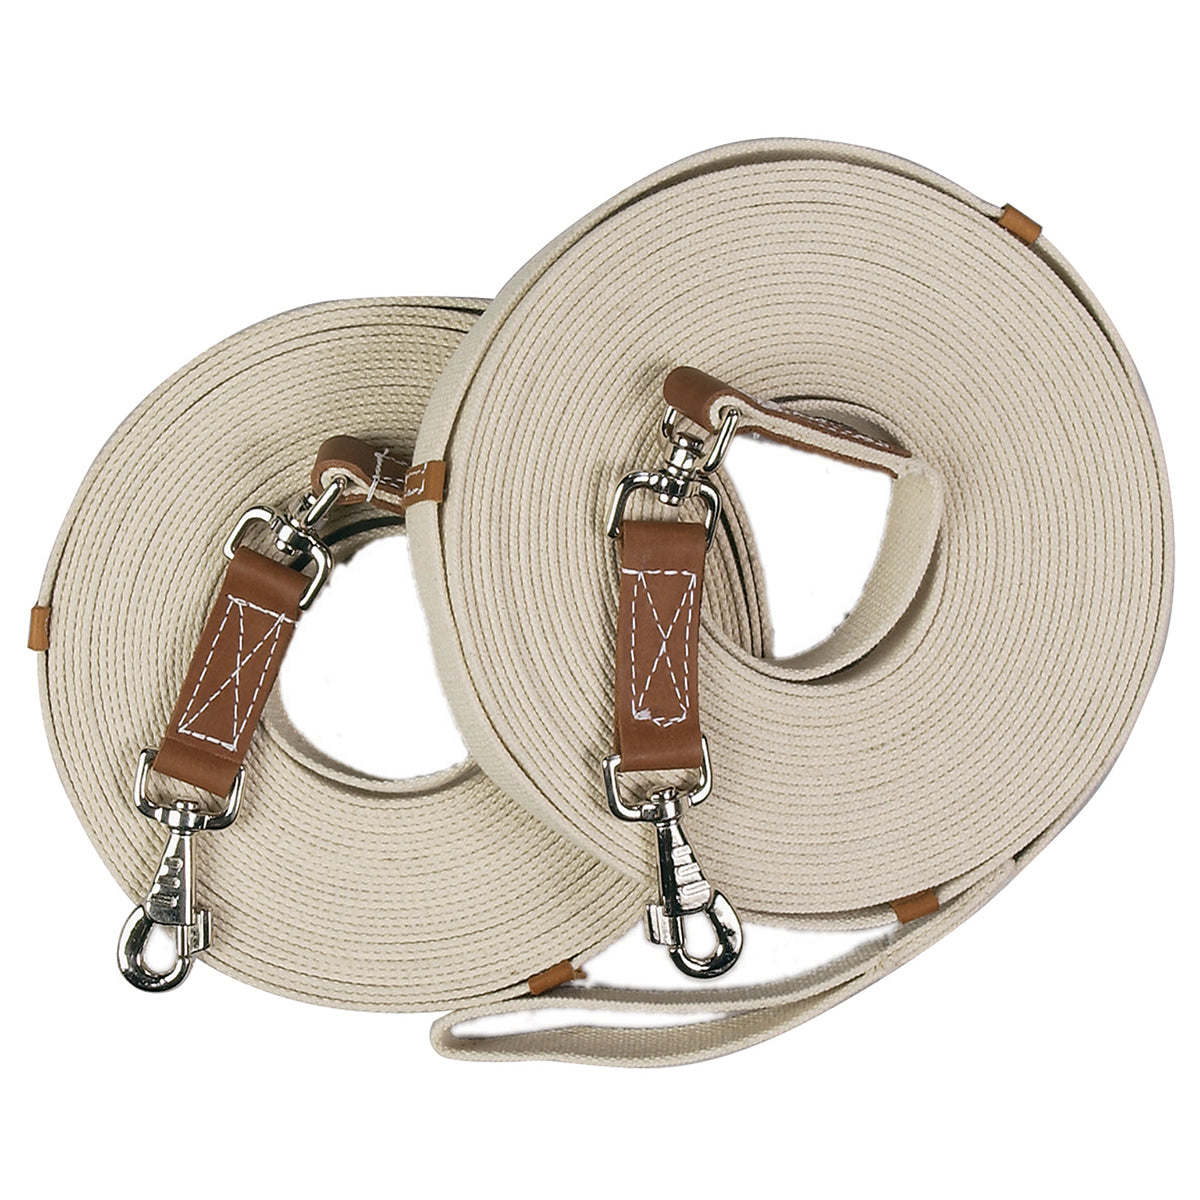 Cotton Web 50' Lunge with Loop